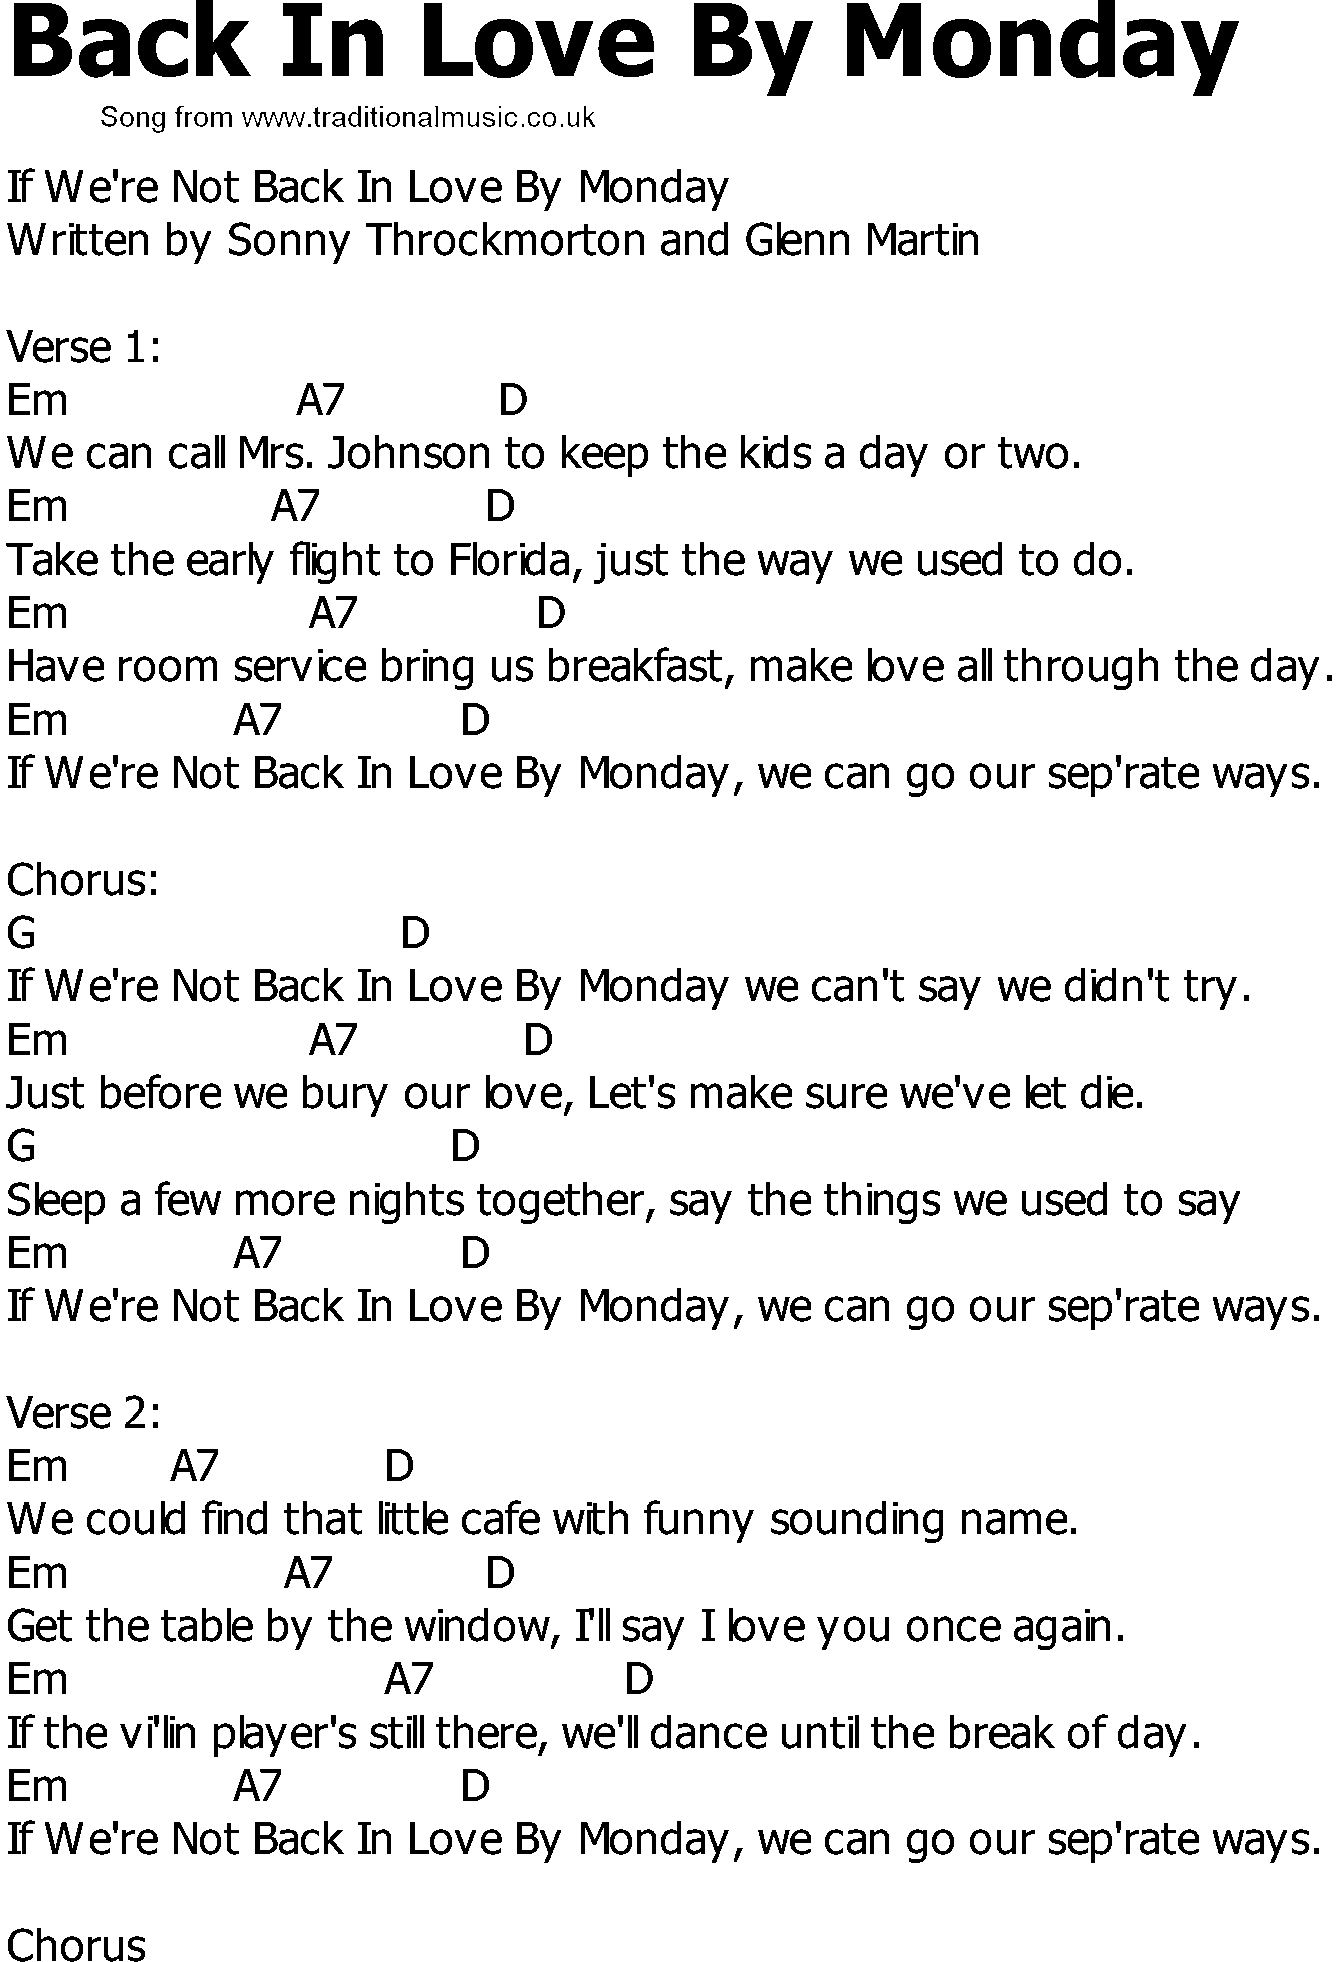 Old Country song lyrics with chords - Back In Love By Monday